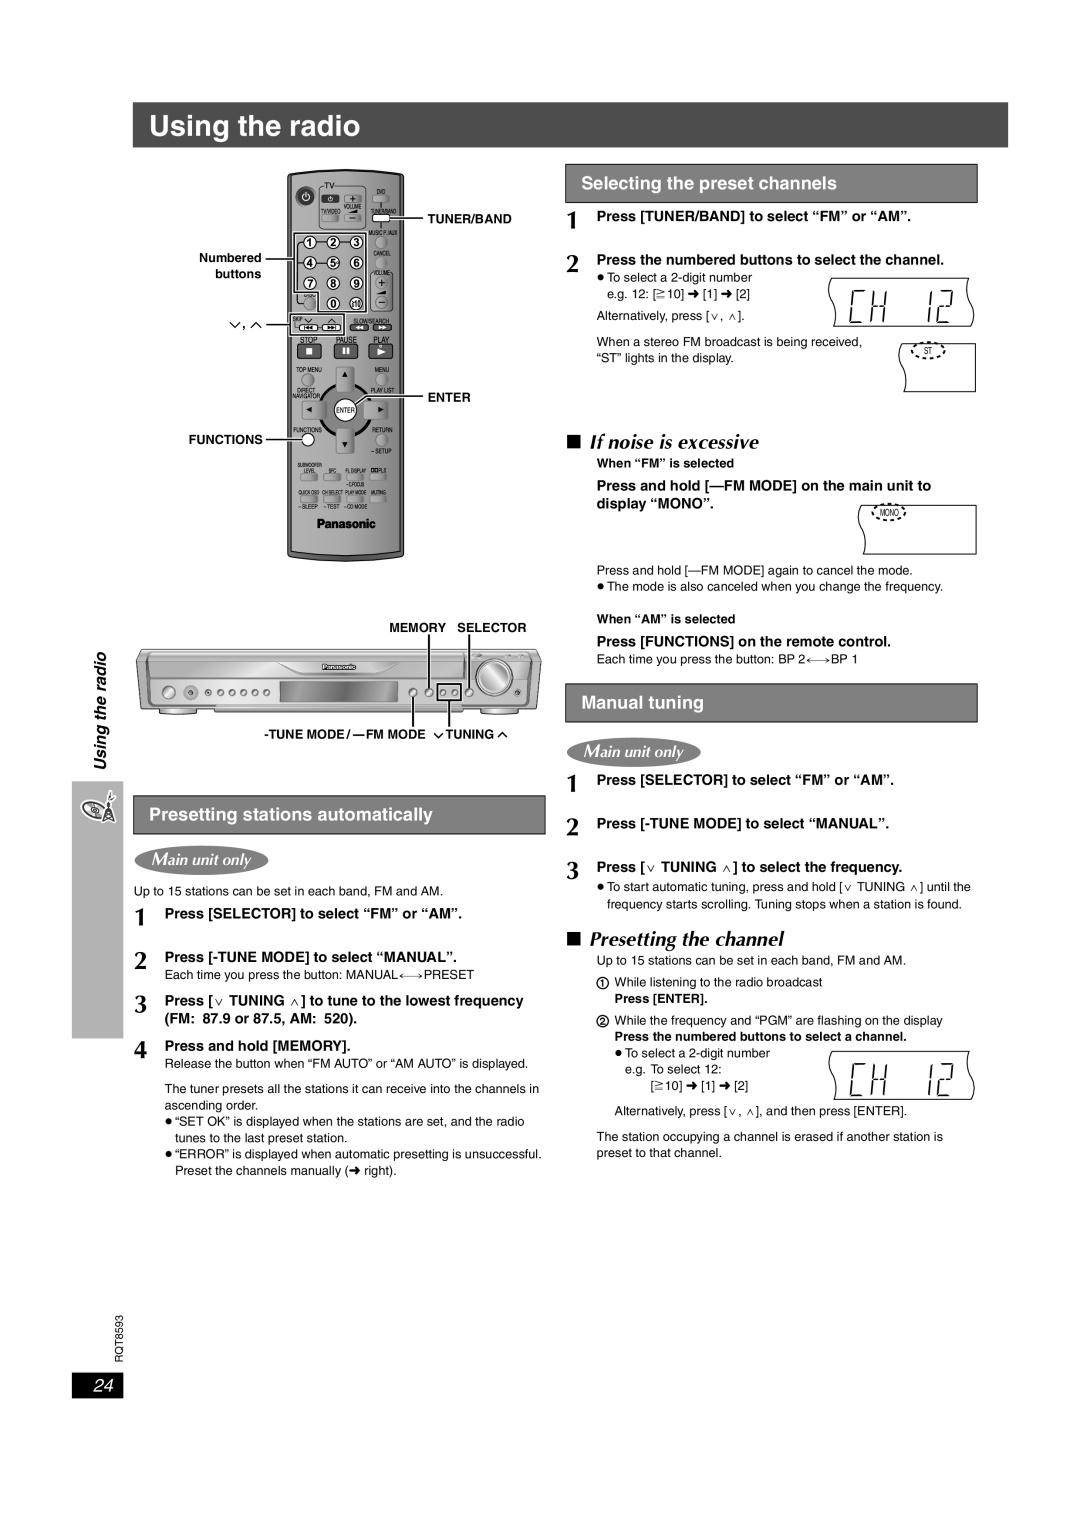 Panasonic SC-HT440 manual Using the radio, If noise is excessive, Presetting the channel, Presetting stations automatically 